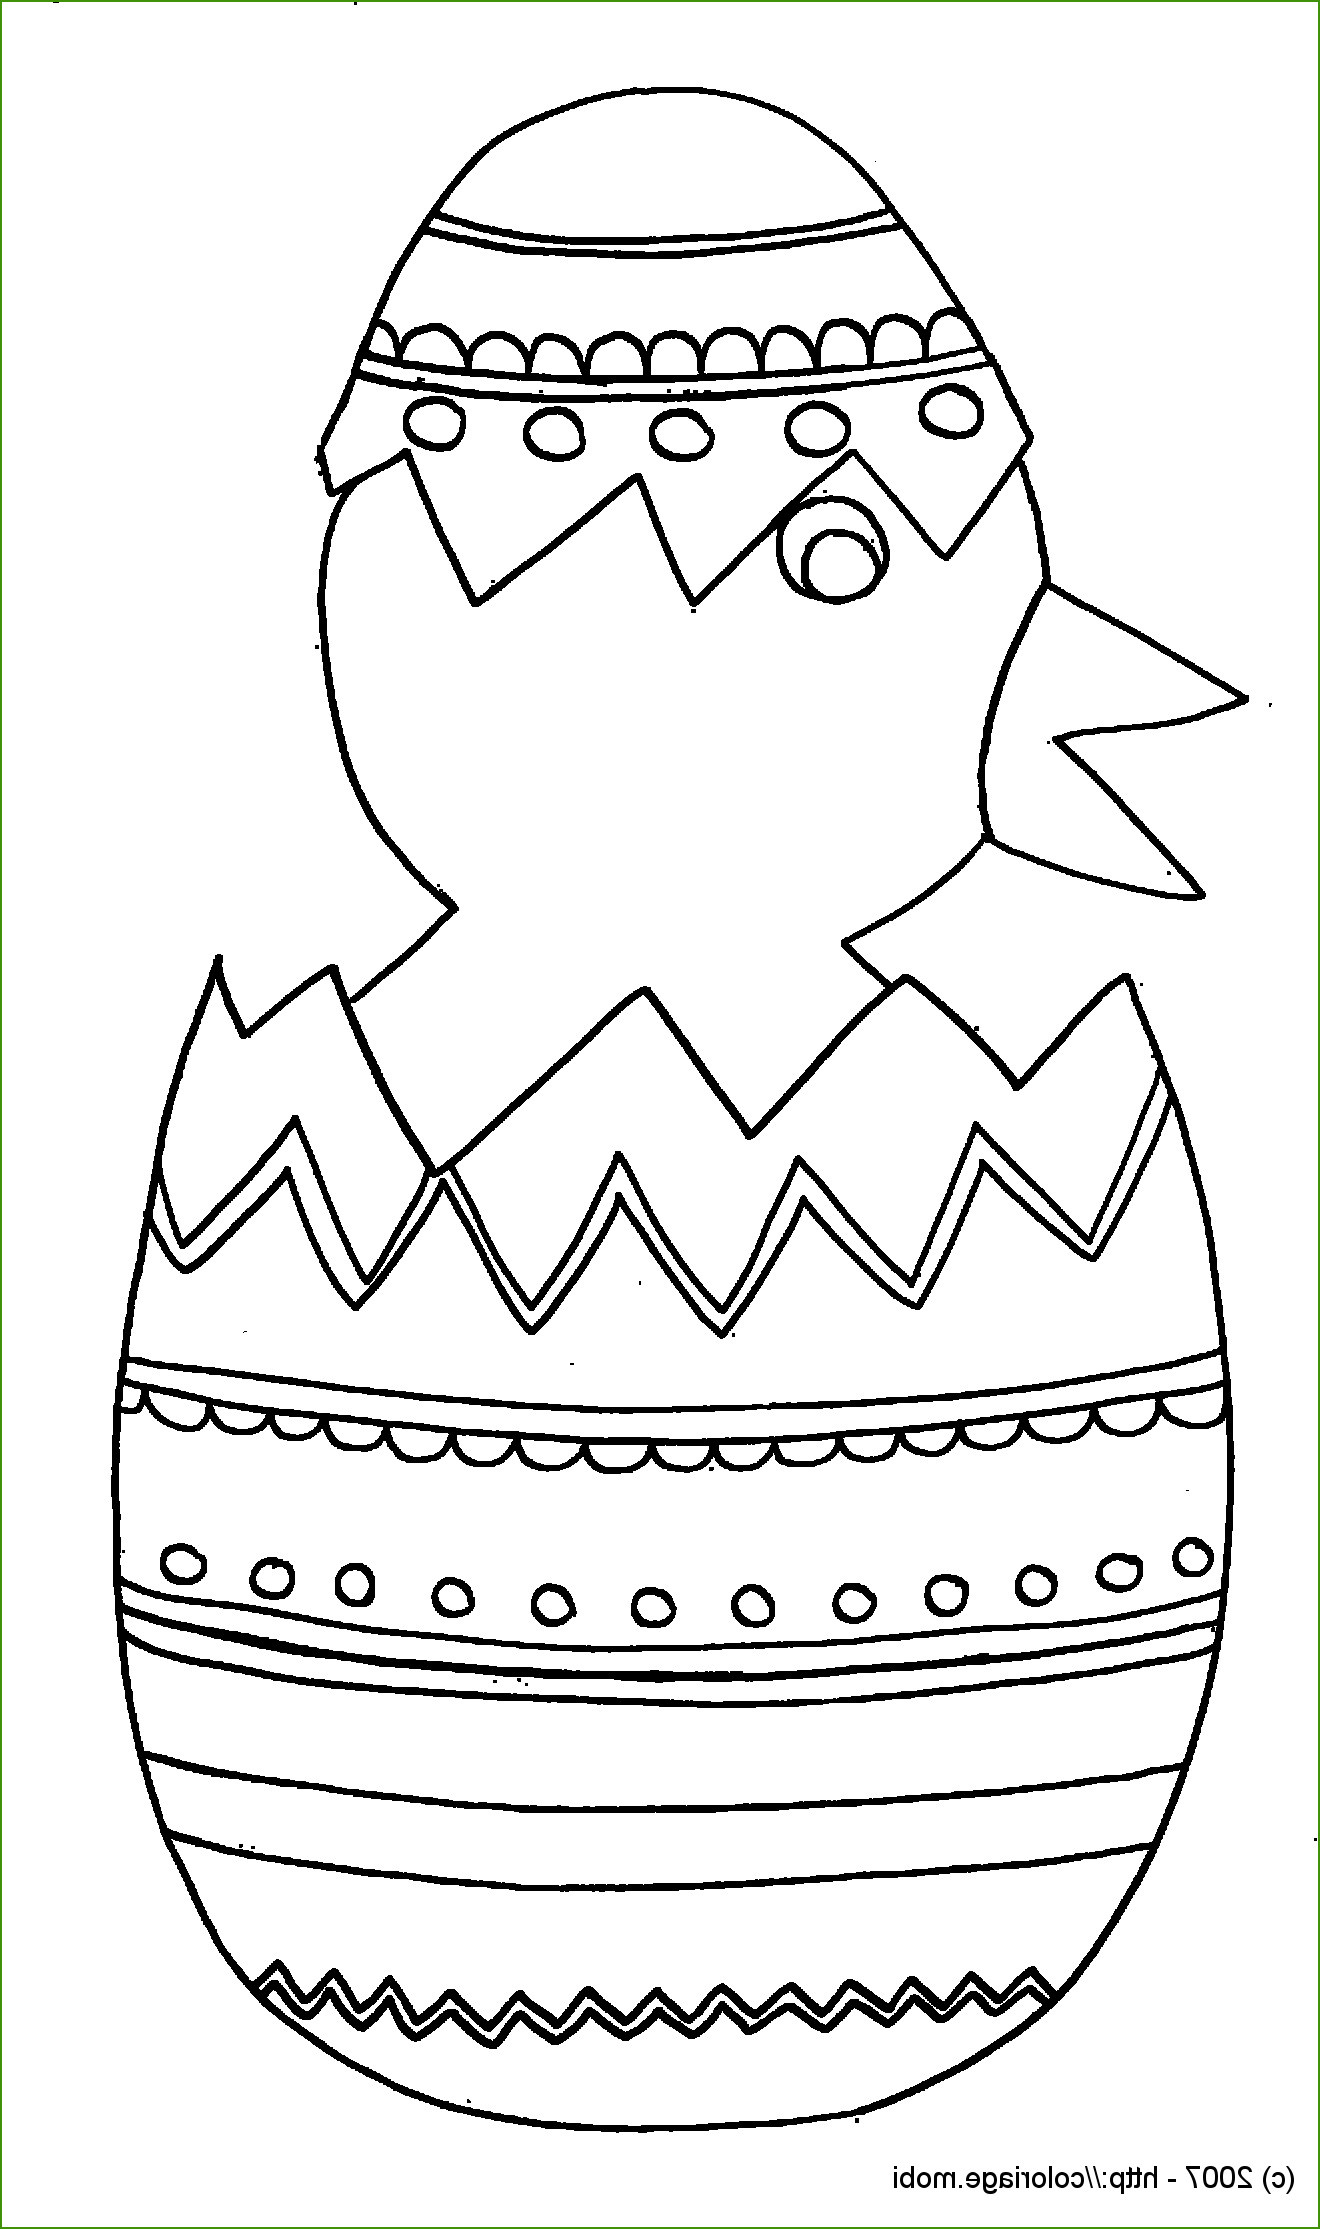 Coloriage Paques Facile Luxe Collection Coloriage sos Fantome Facile Coloriage Oeufs De Paques